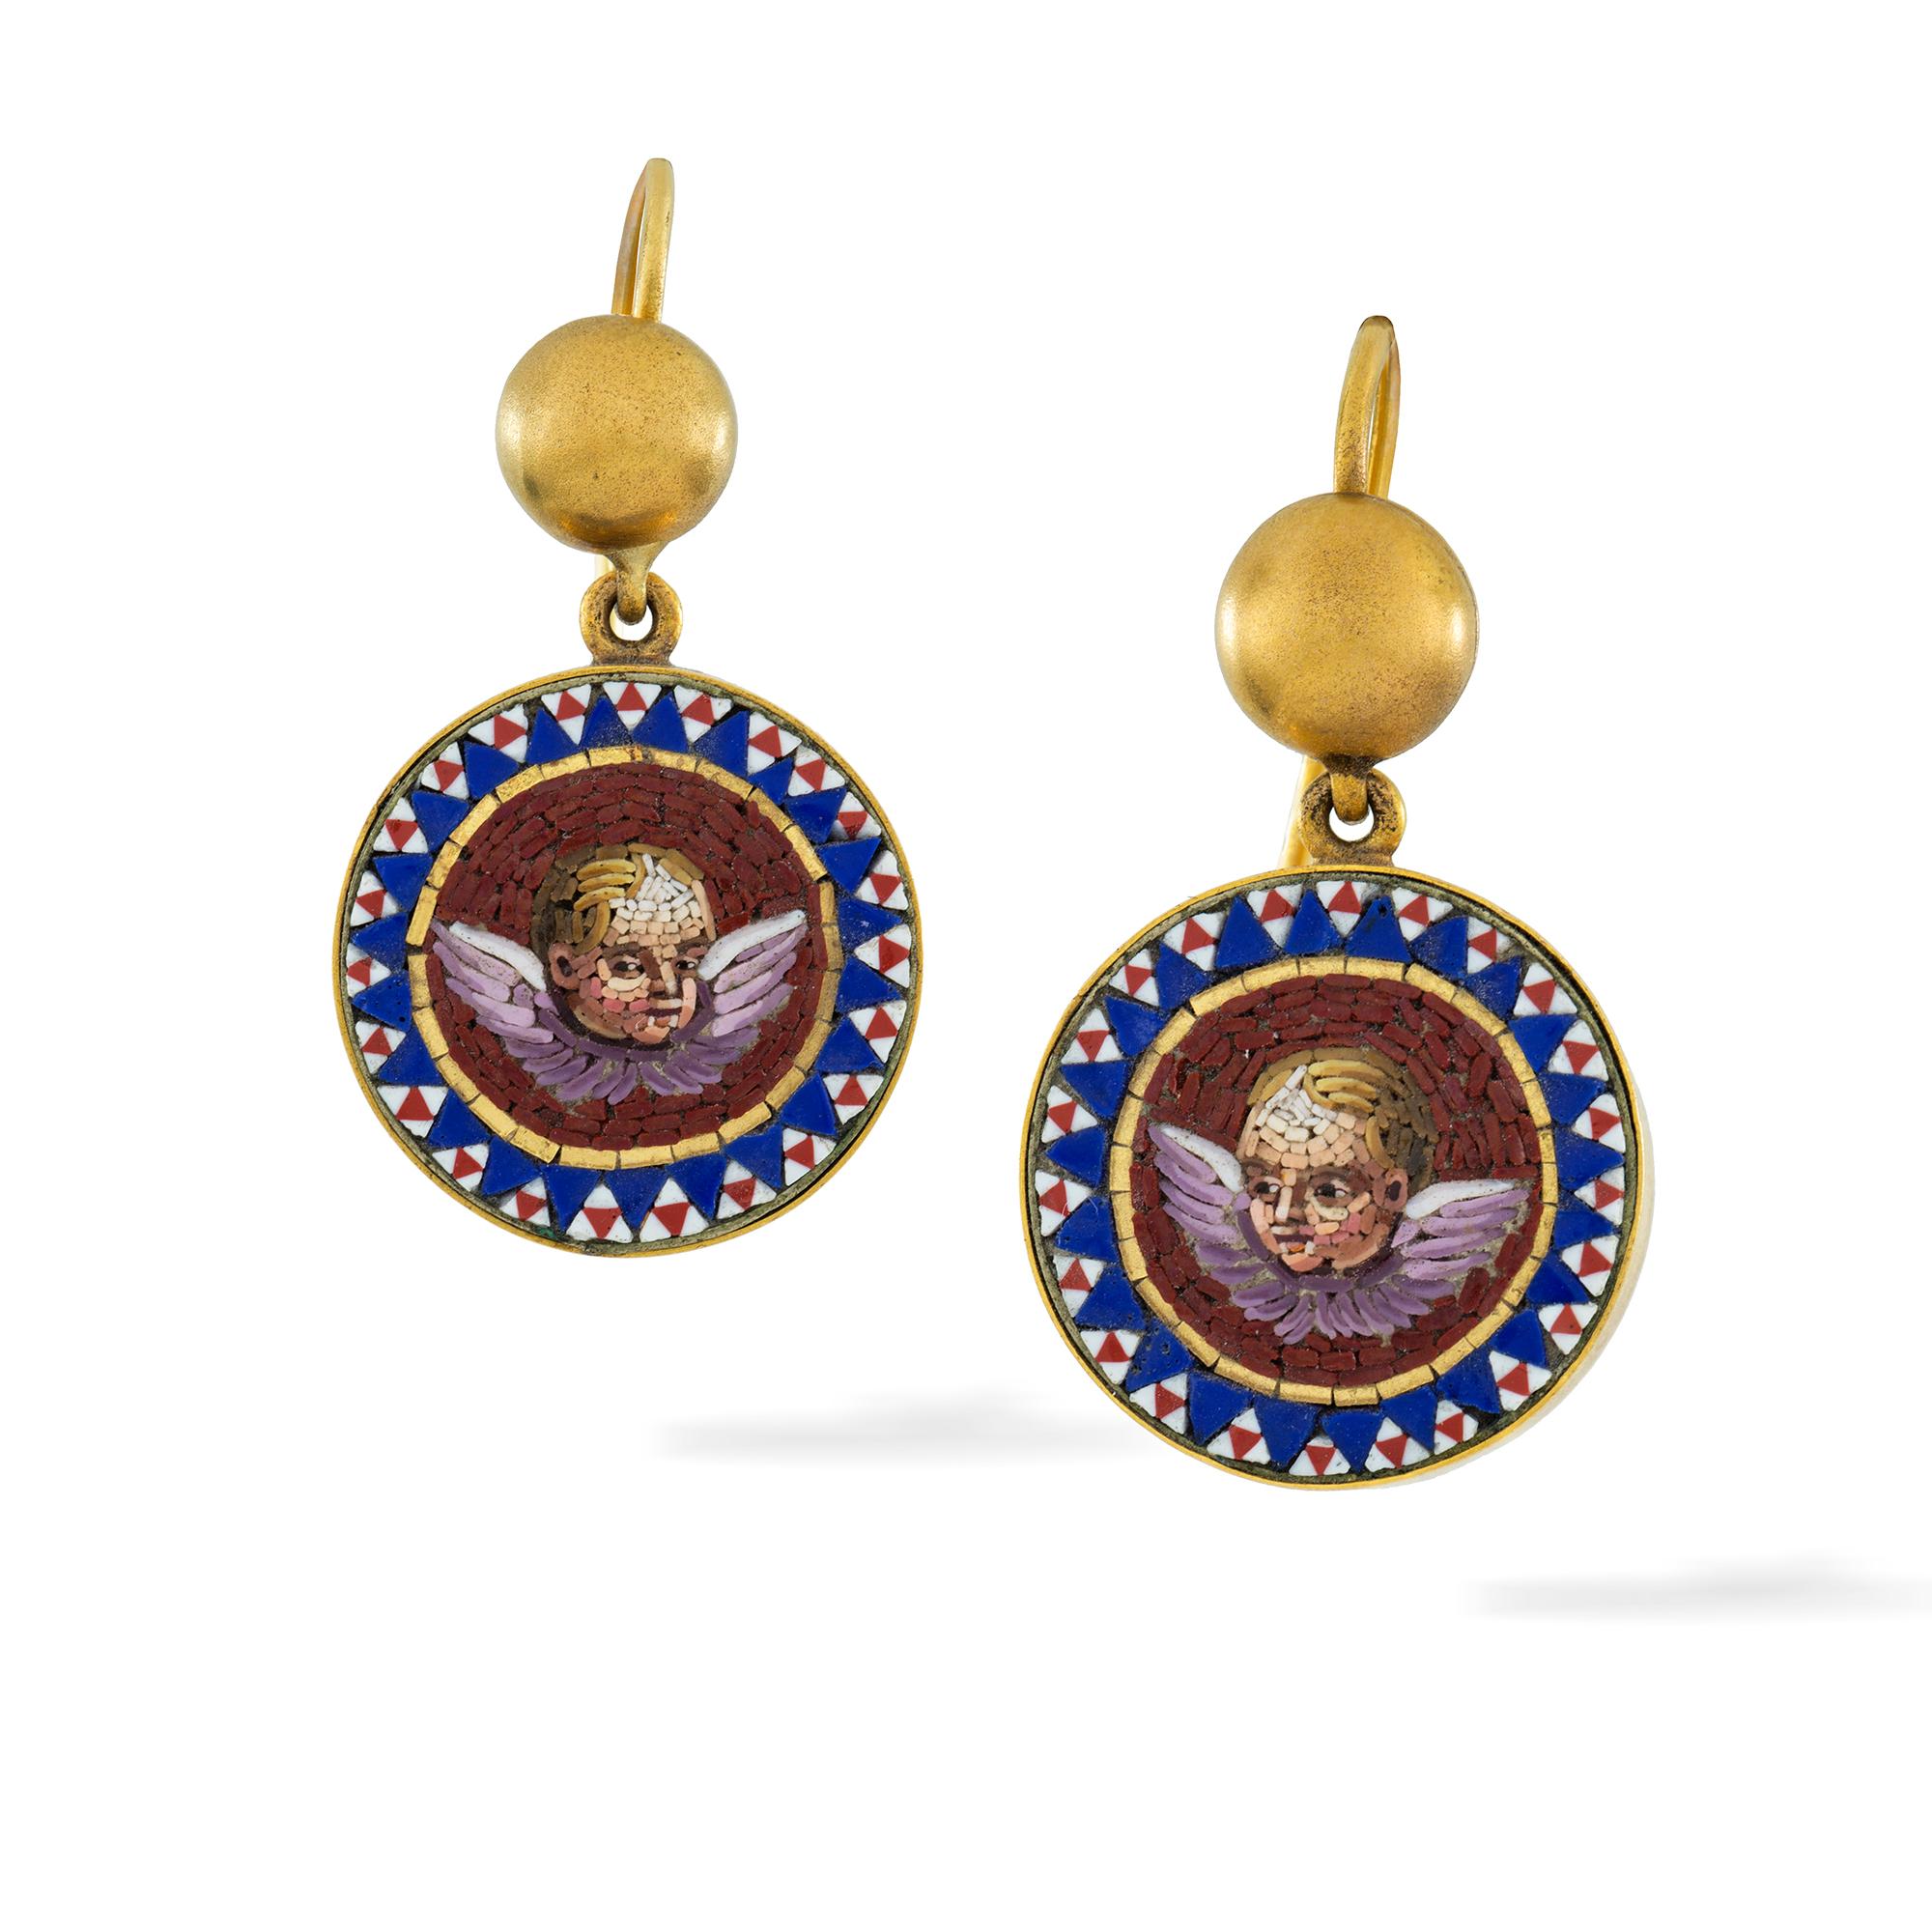 A pair of Victorian micro-mosaic  drop earrings, the circular plaque at the centre depicting a cupid, within a frame of geometric design, all set in yellow gold, suspended by a gold domed top with wire hook fittings, circa 1860,  gross weight 8